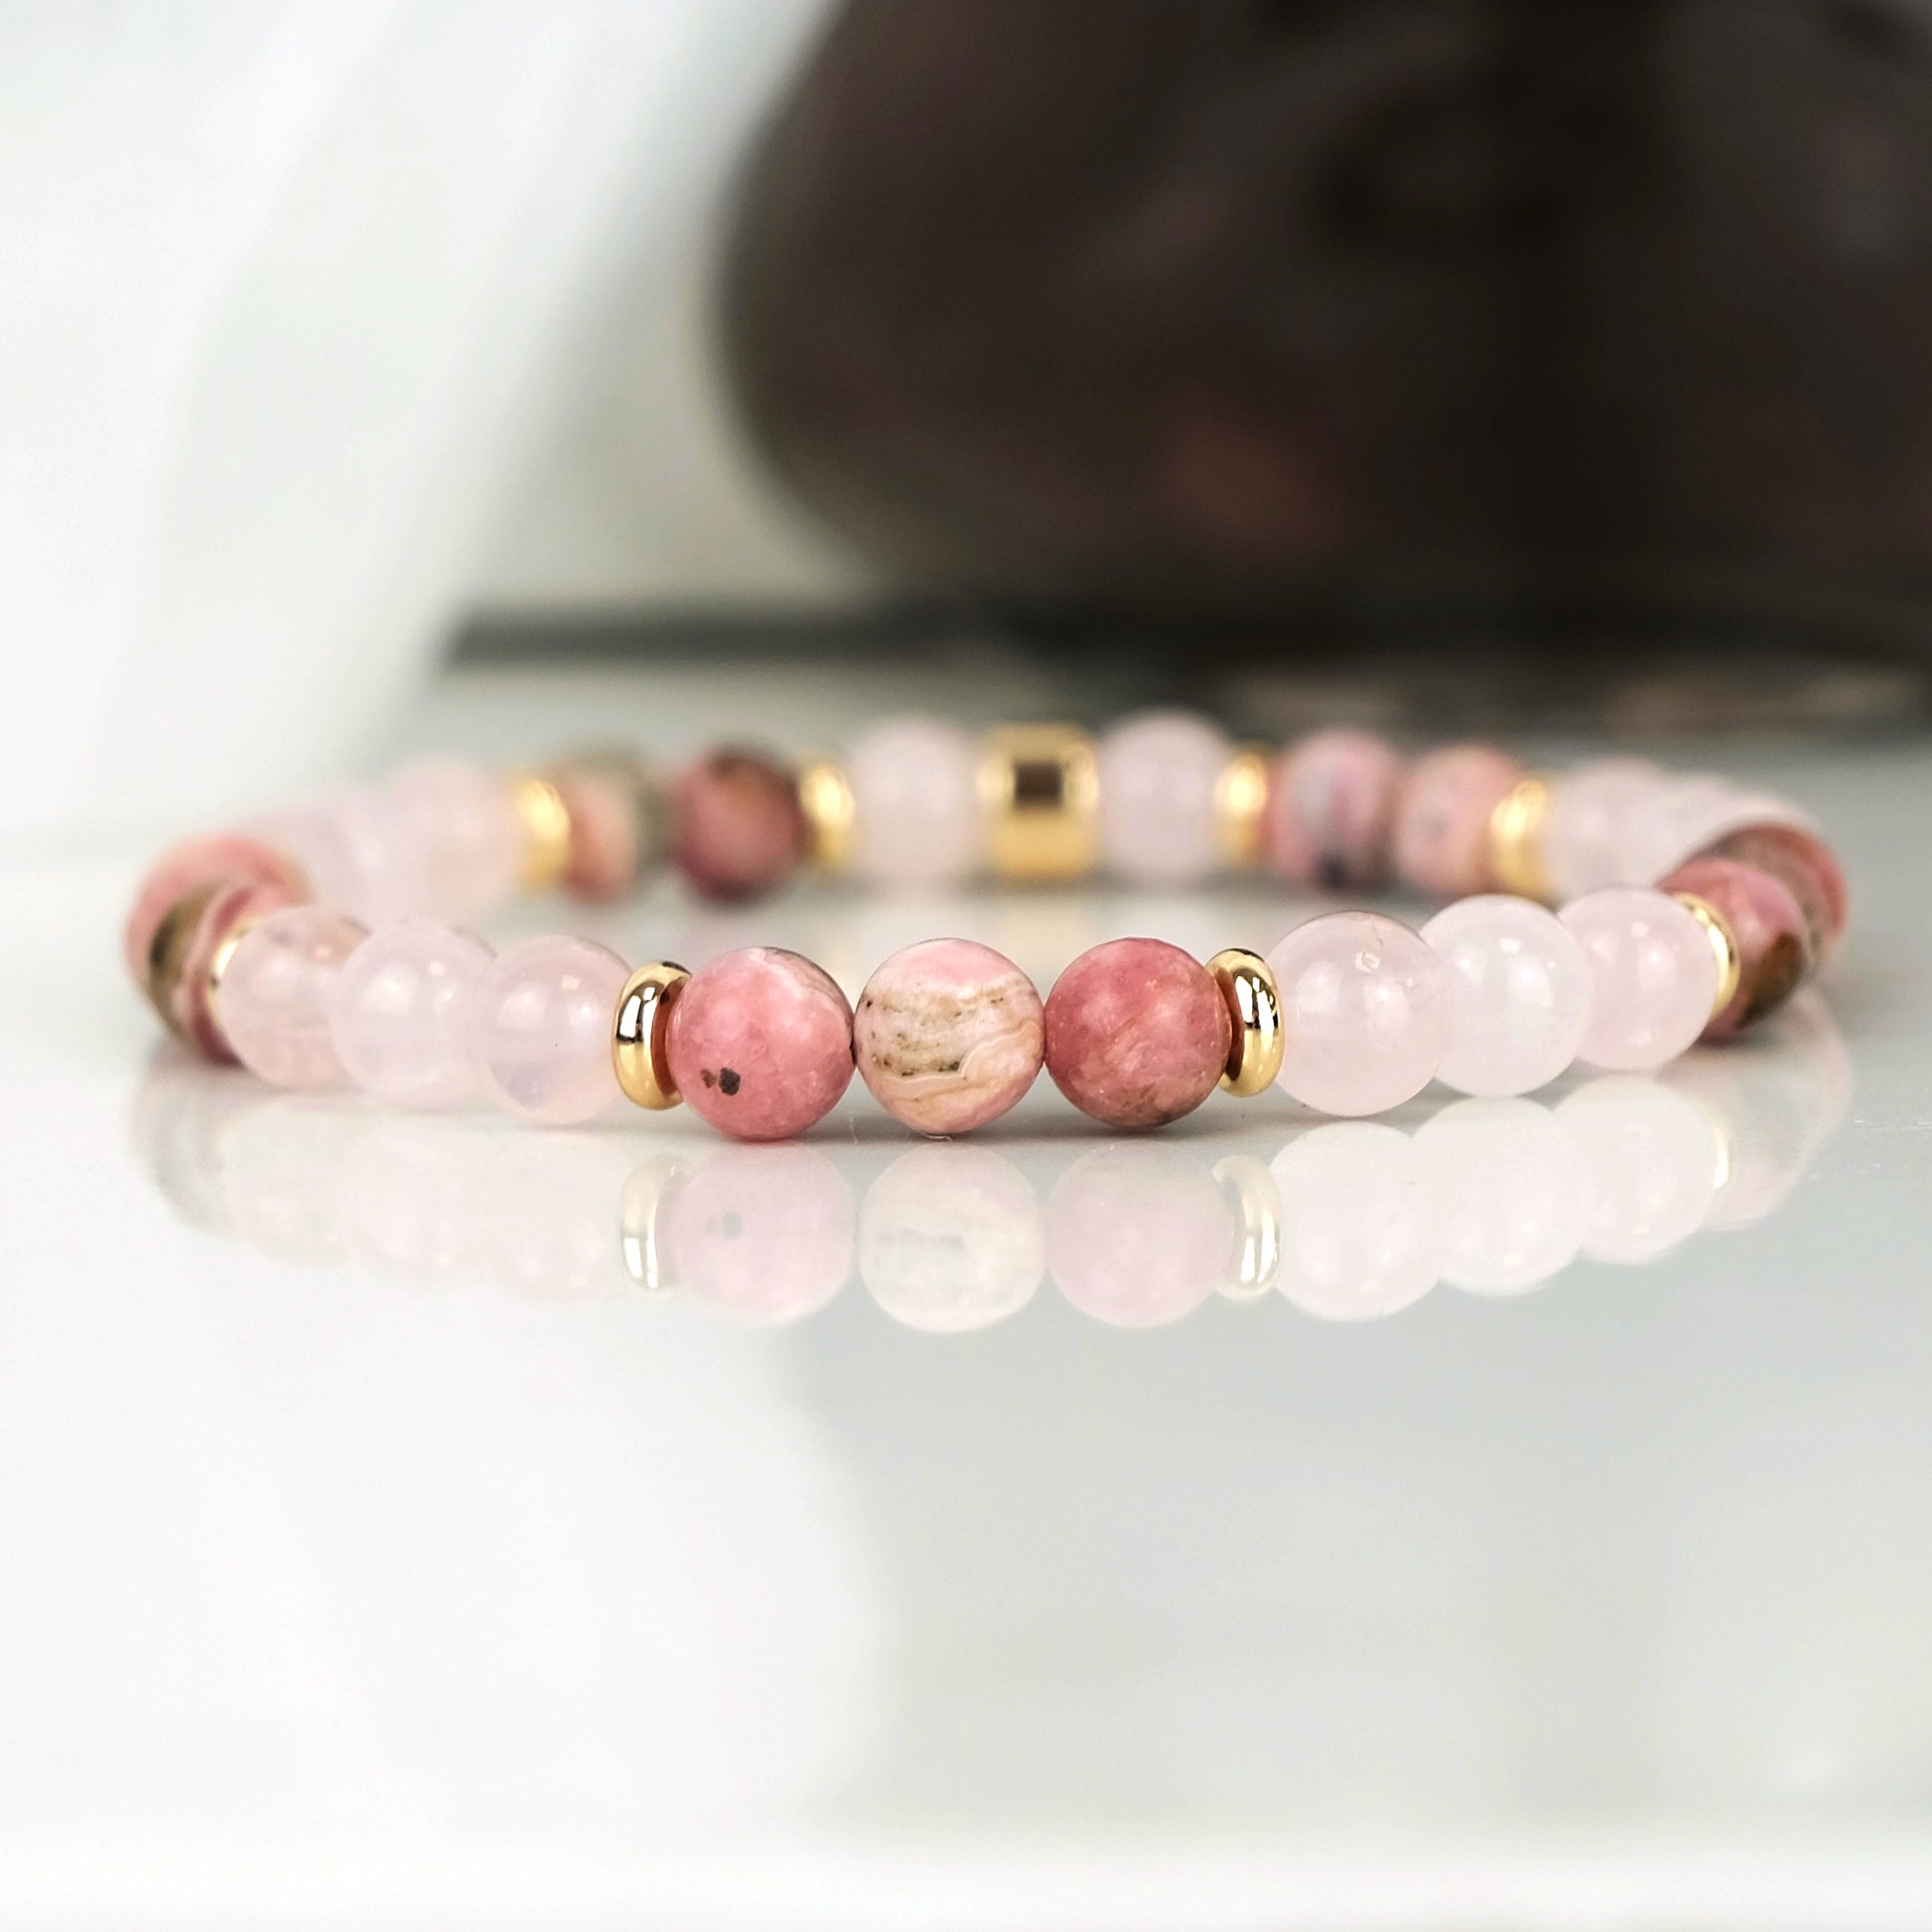 Rhodonite and rose quartz gemstone bracelet in 6mm beads with gold accessories